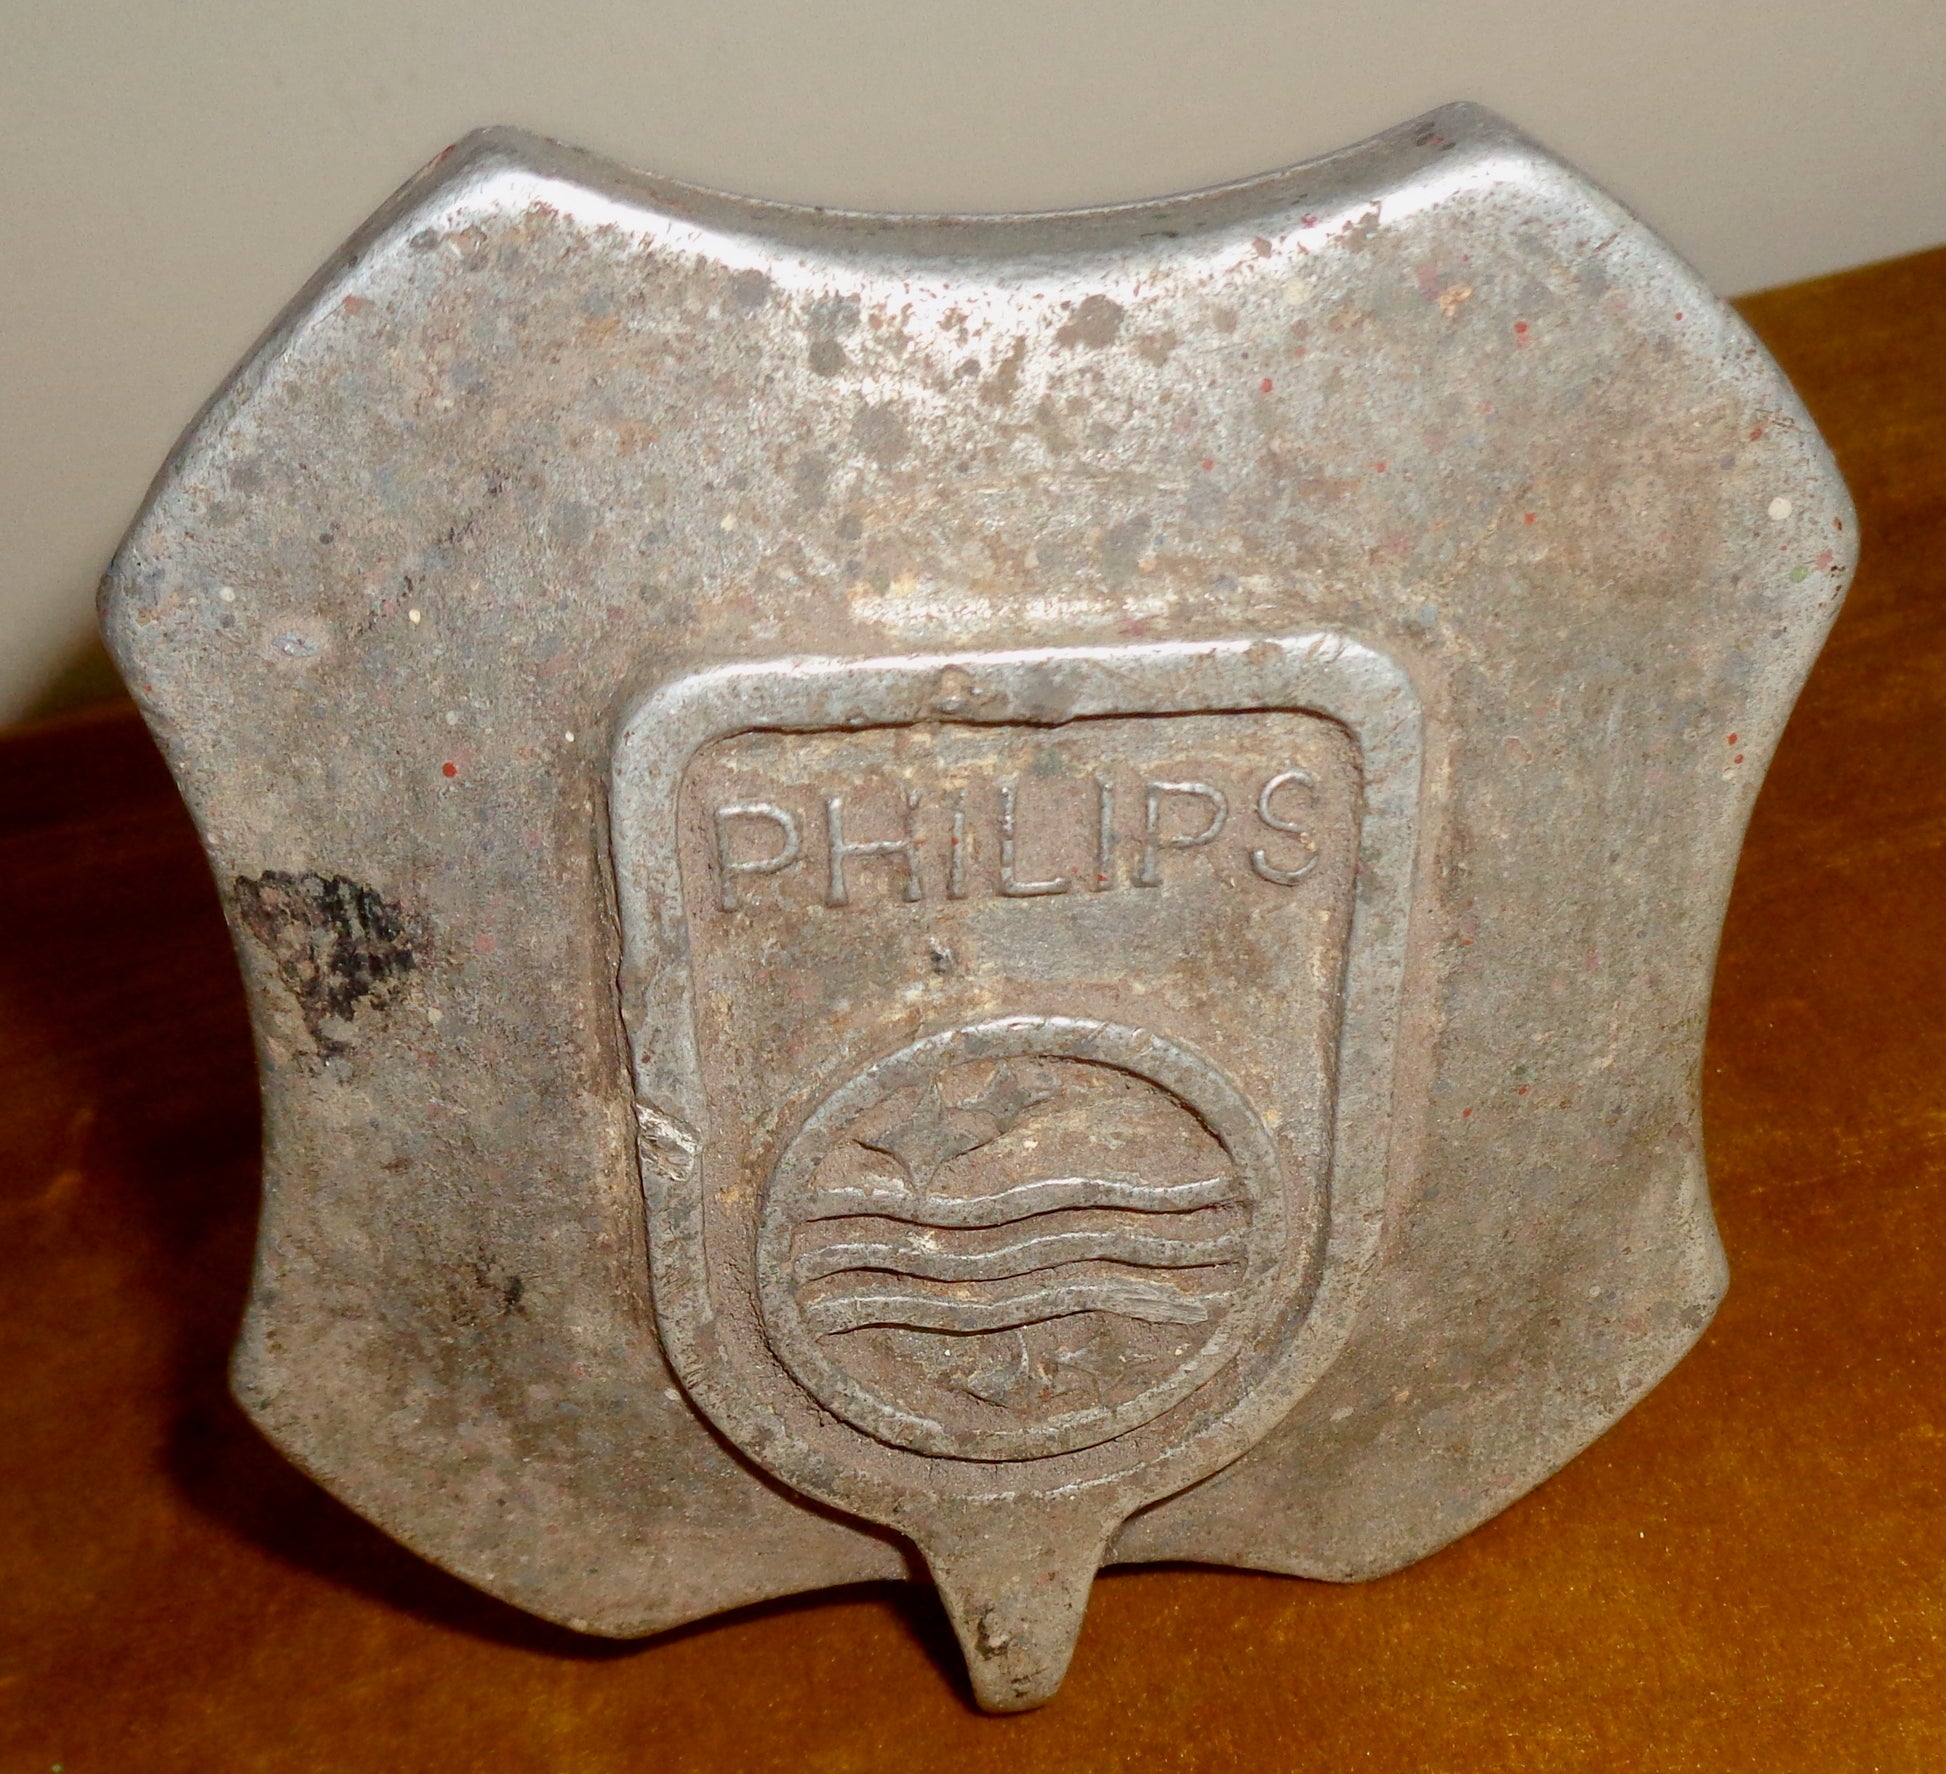 1940s Philips Cast Aluminium Handle From A Broadcast Transmitter Cabinet